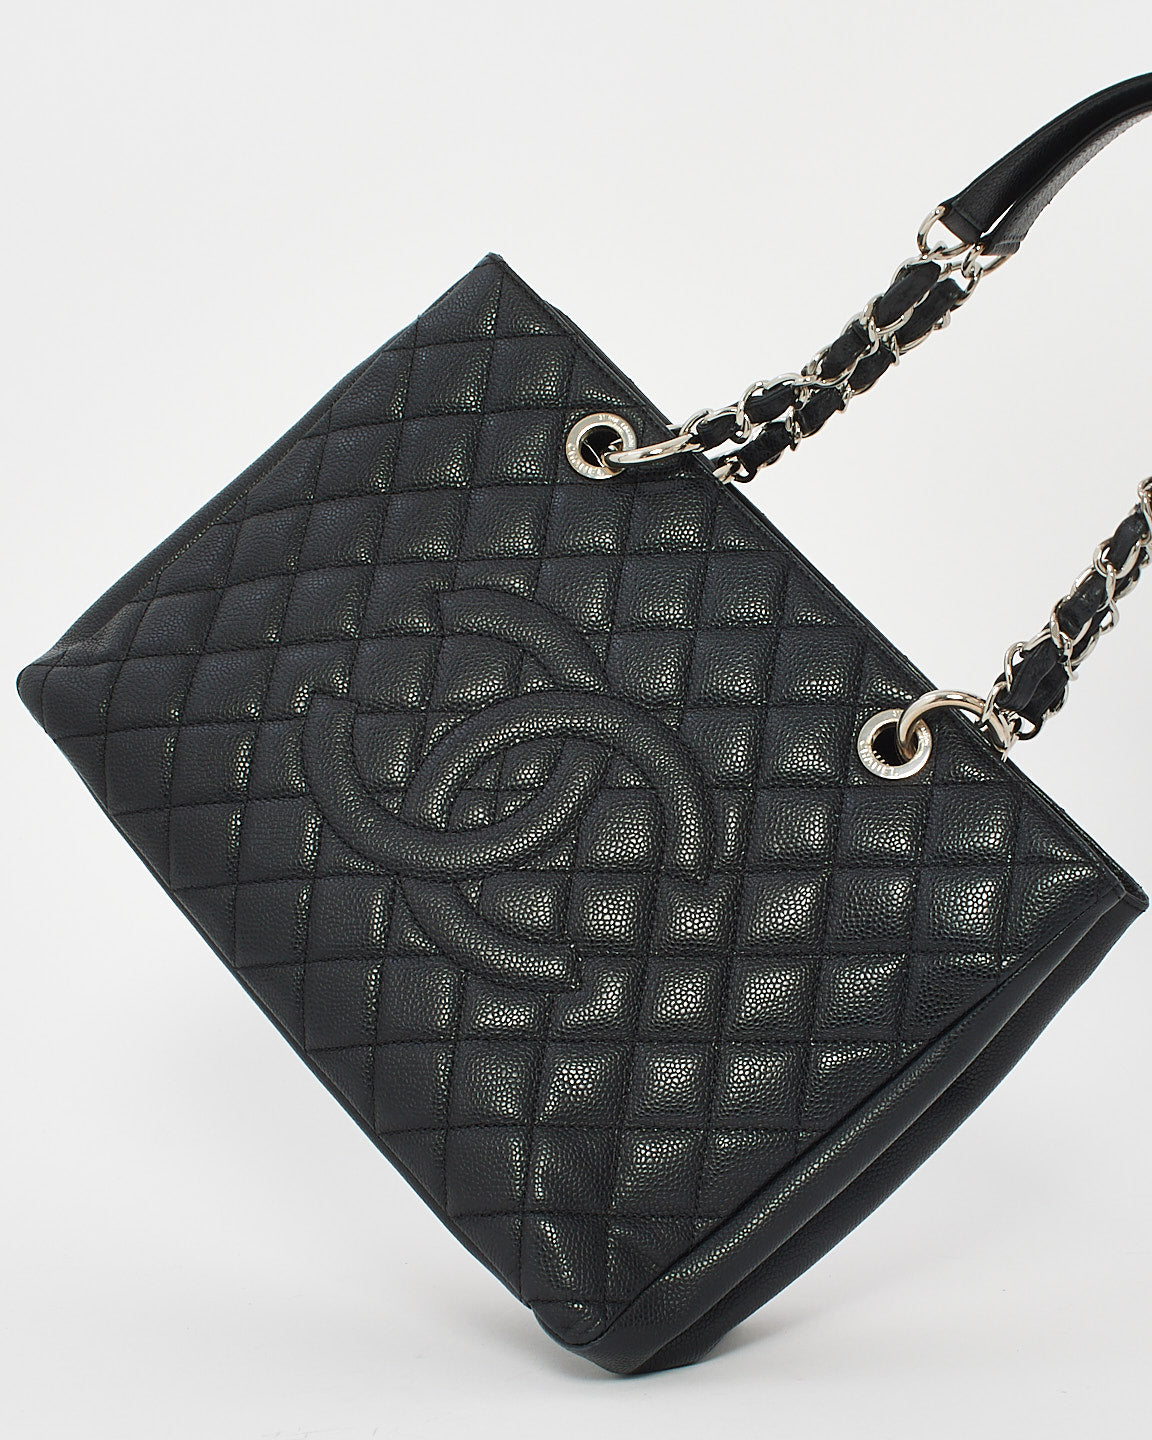 Chanel Black Caviar Quilted GST Shopping Tote Bag